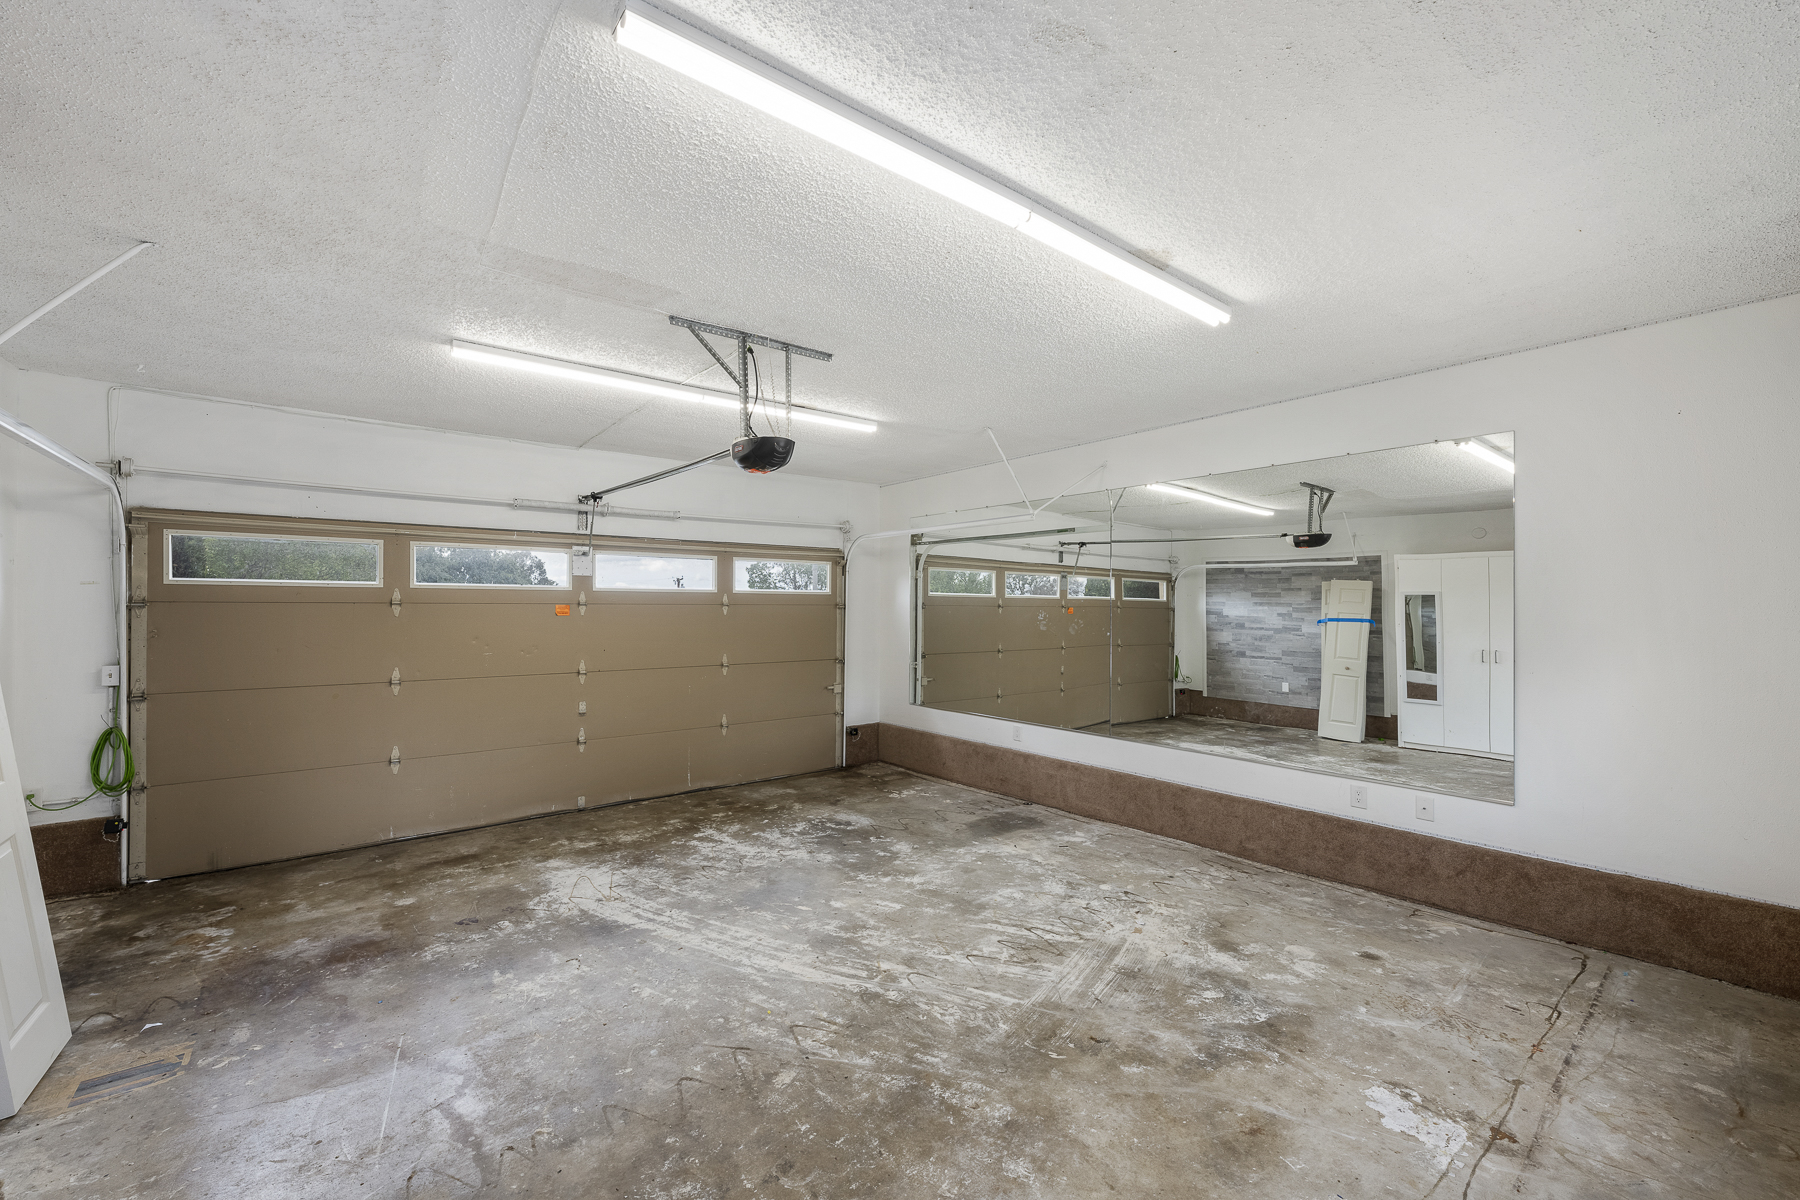 501 Dorothy Drive: Frontal interior view of closed in garage